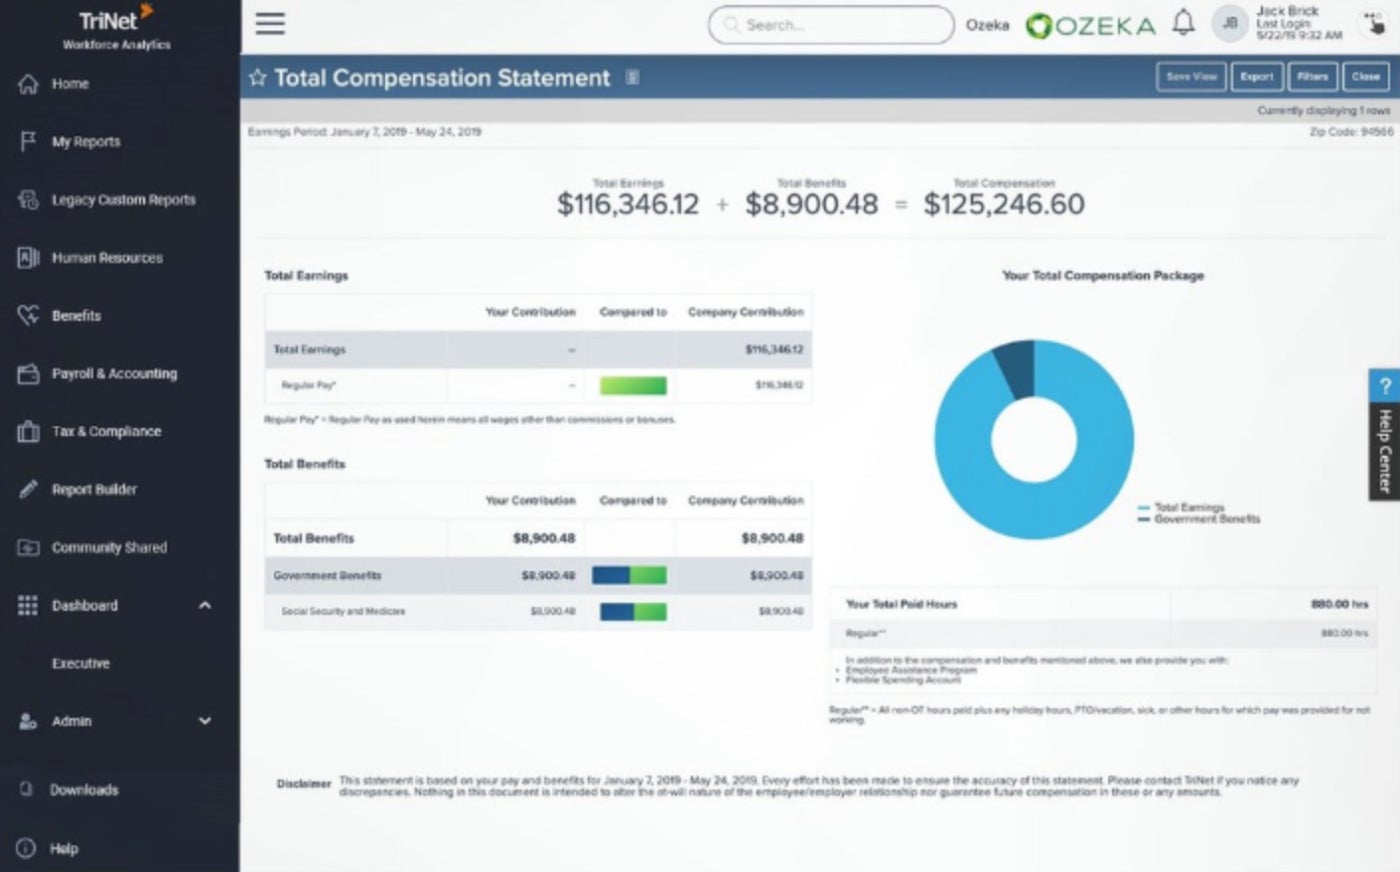 An example of a compensation management statement in TriNet.